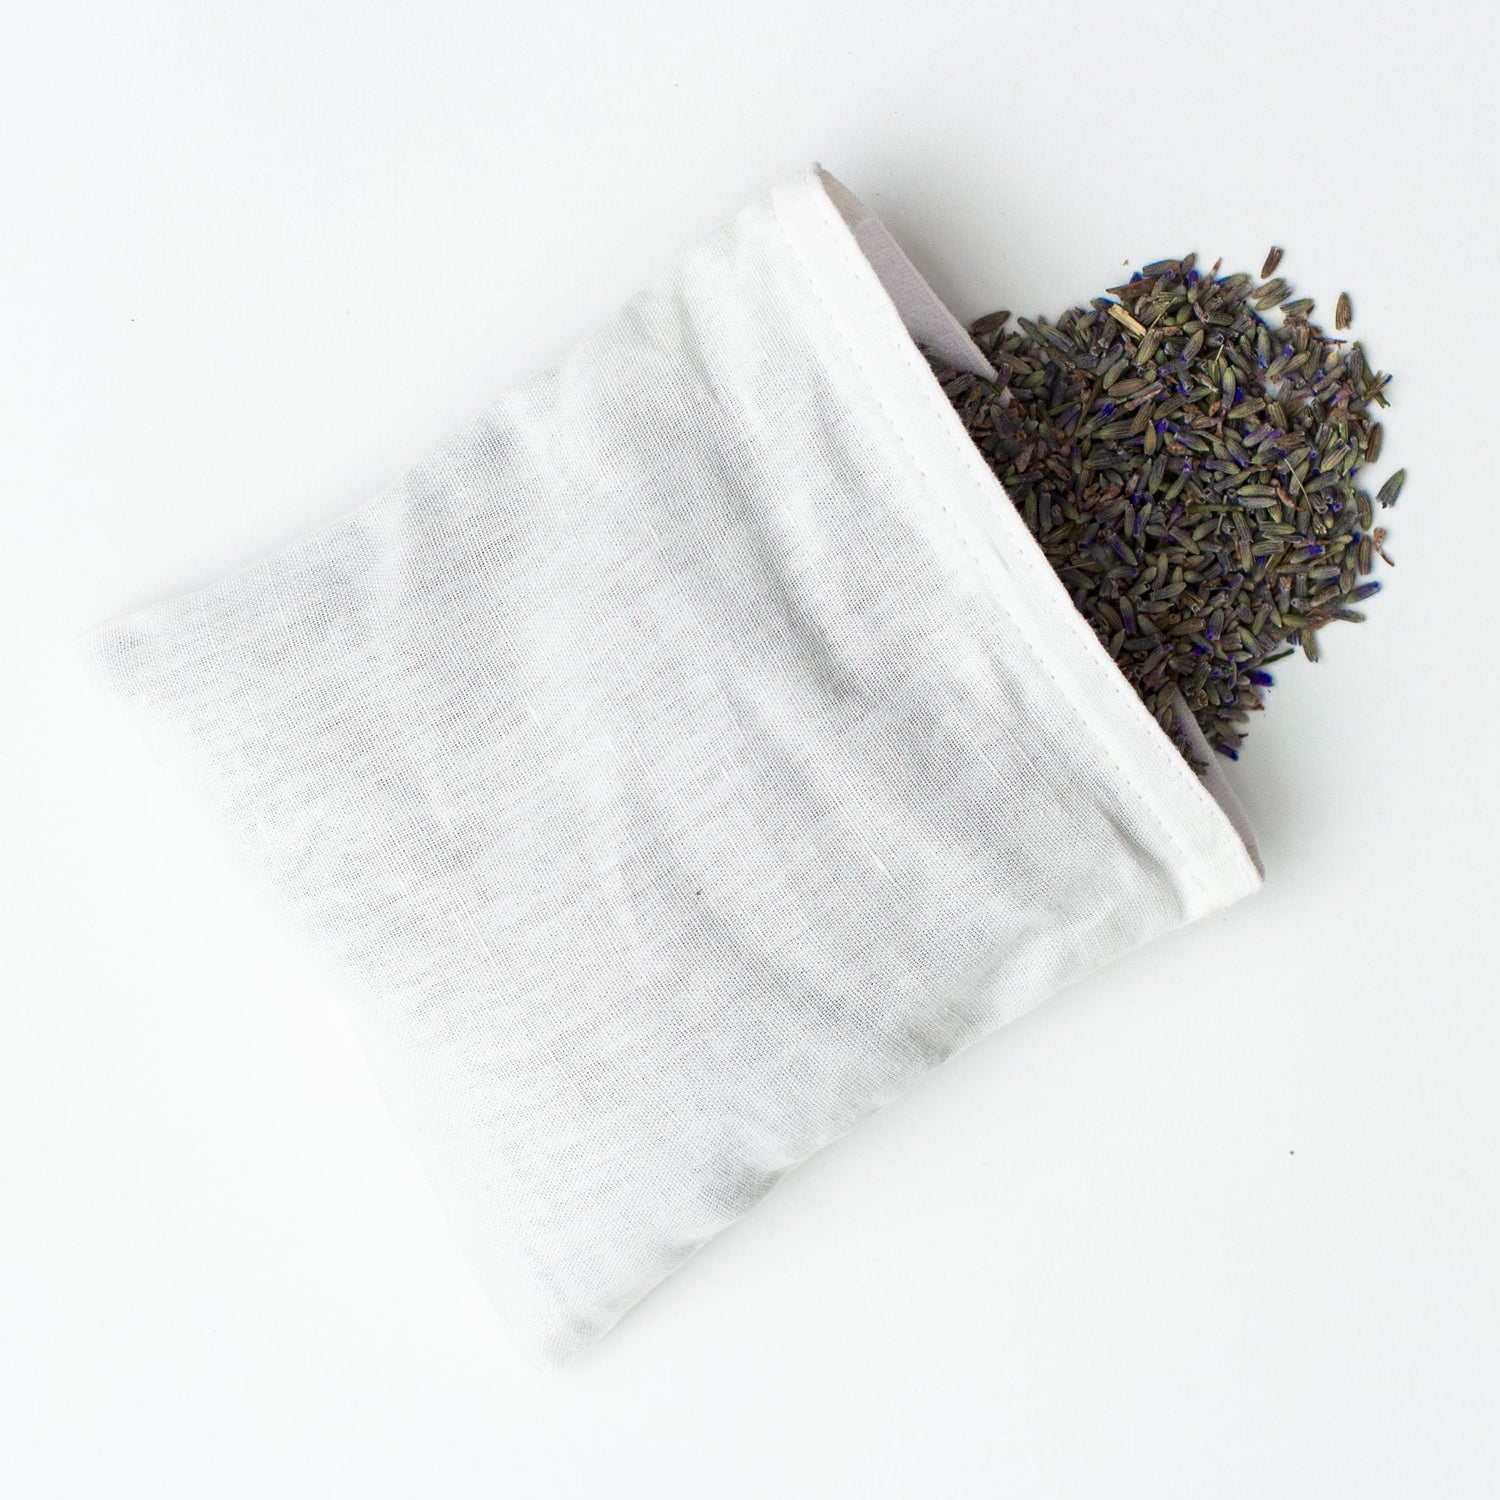 a linen sachet pouch with lavender spilling out the open side